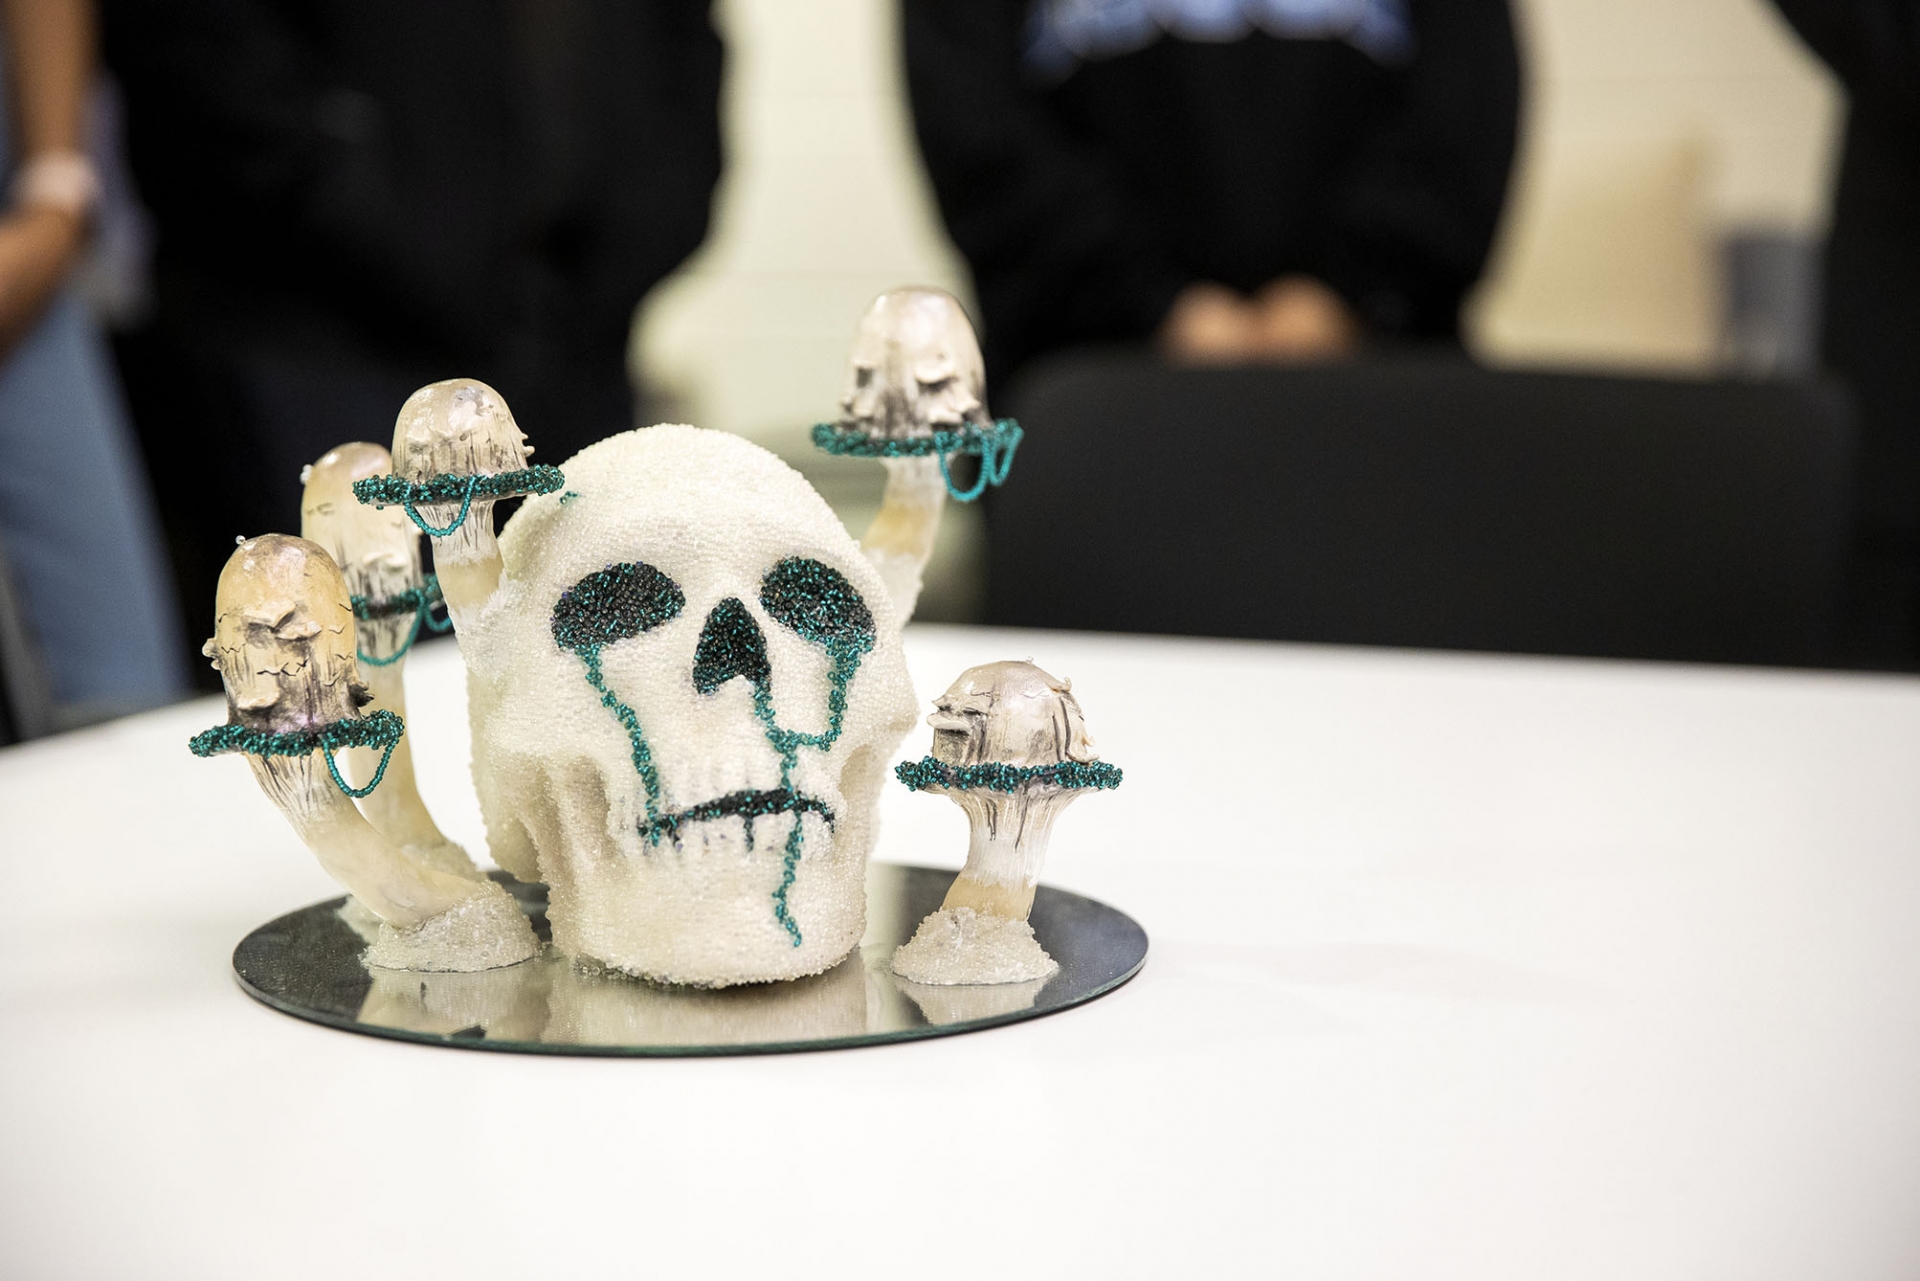 CSUSB art student Valeria Vargas created her piece “Ode to the Inkcap” for the Día de los Muertos (Day of the Dead) celebration and auction last November. 